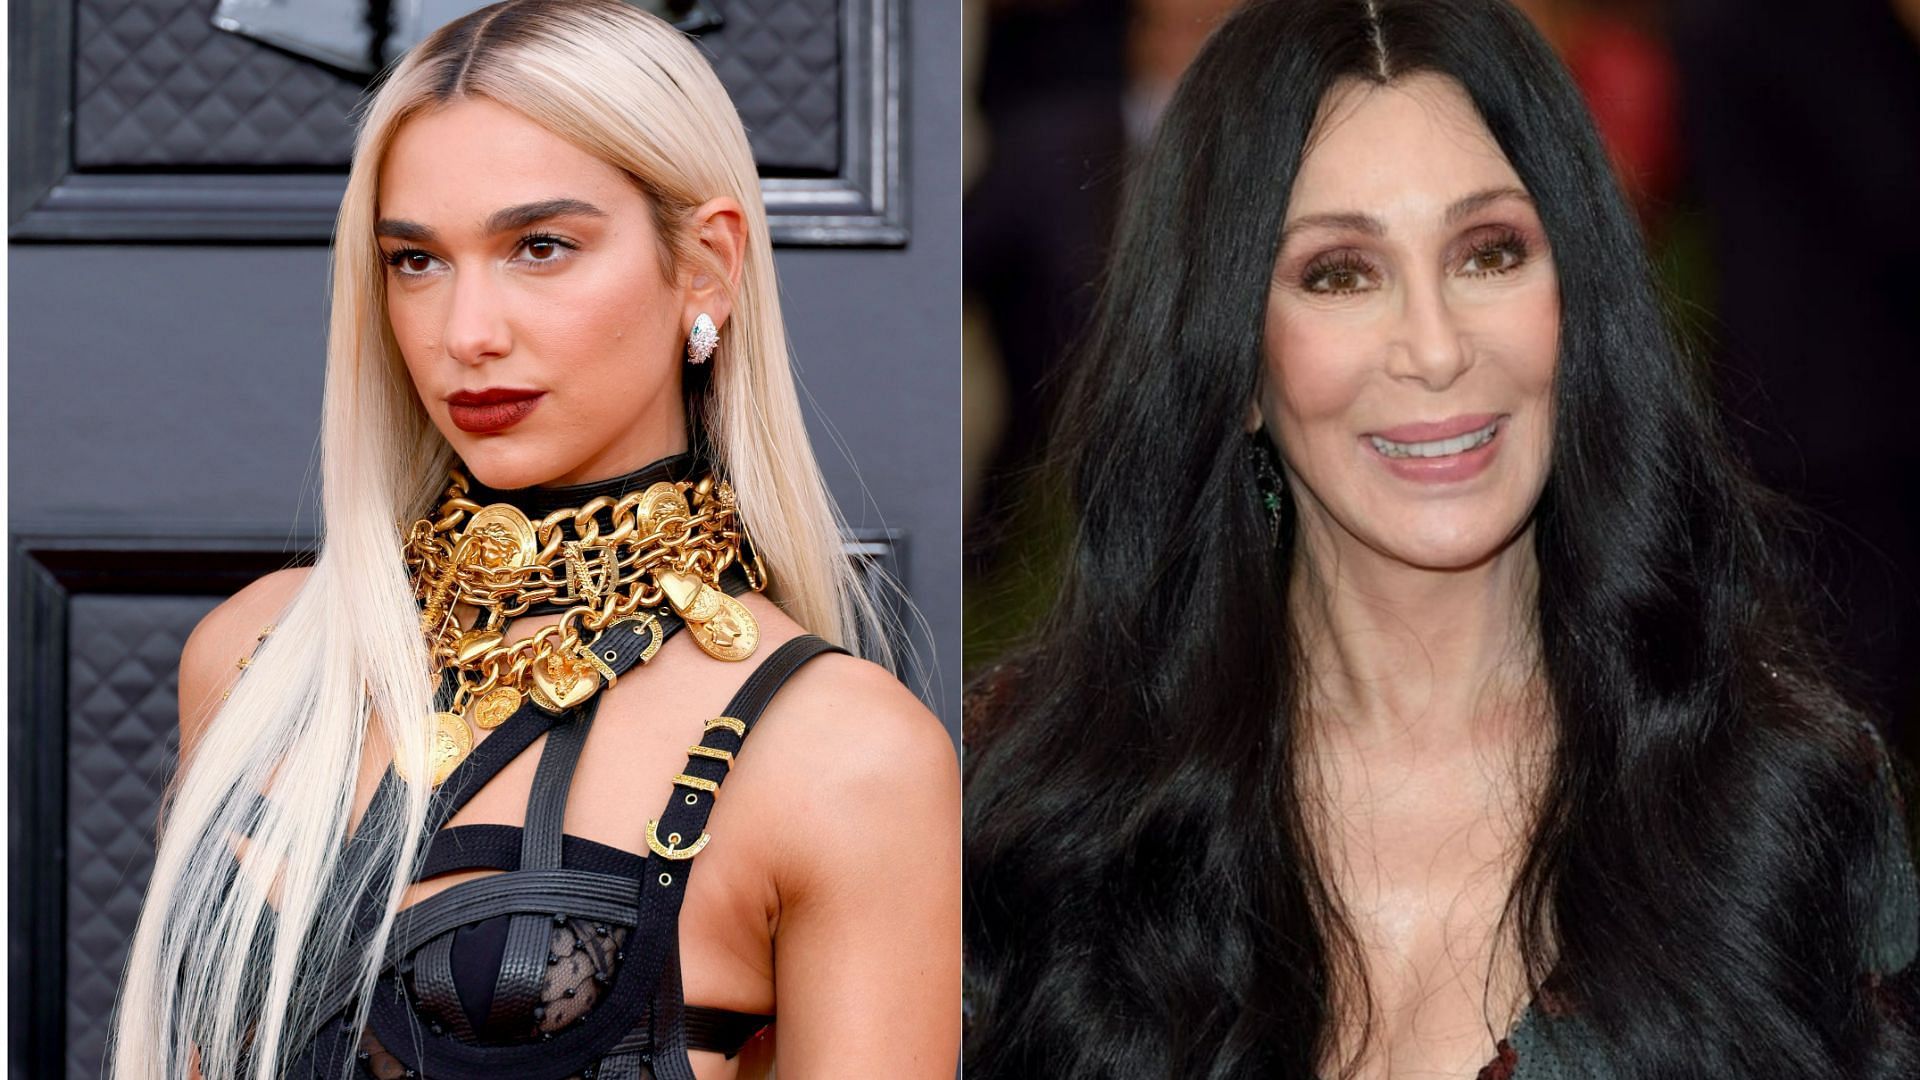 Dua Lipa and Cher compared in lively Twitter debate (Images via Getty Images)